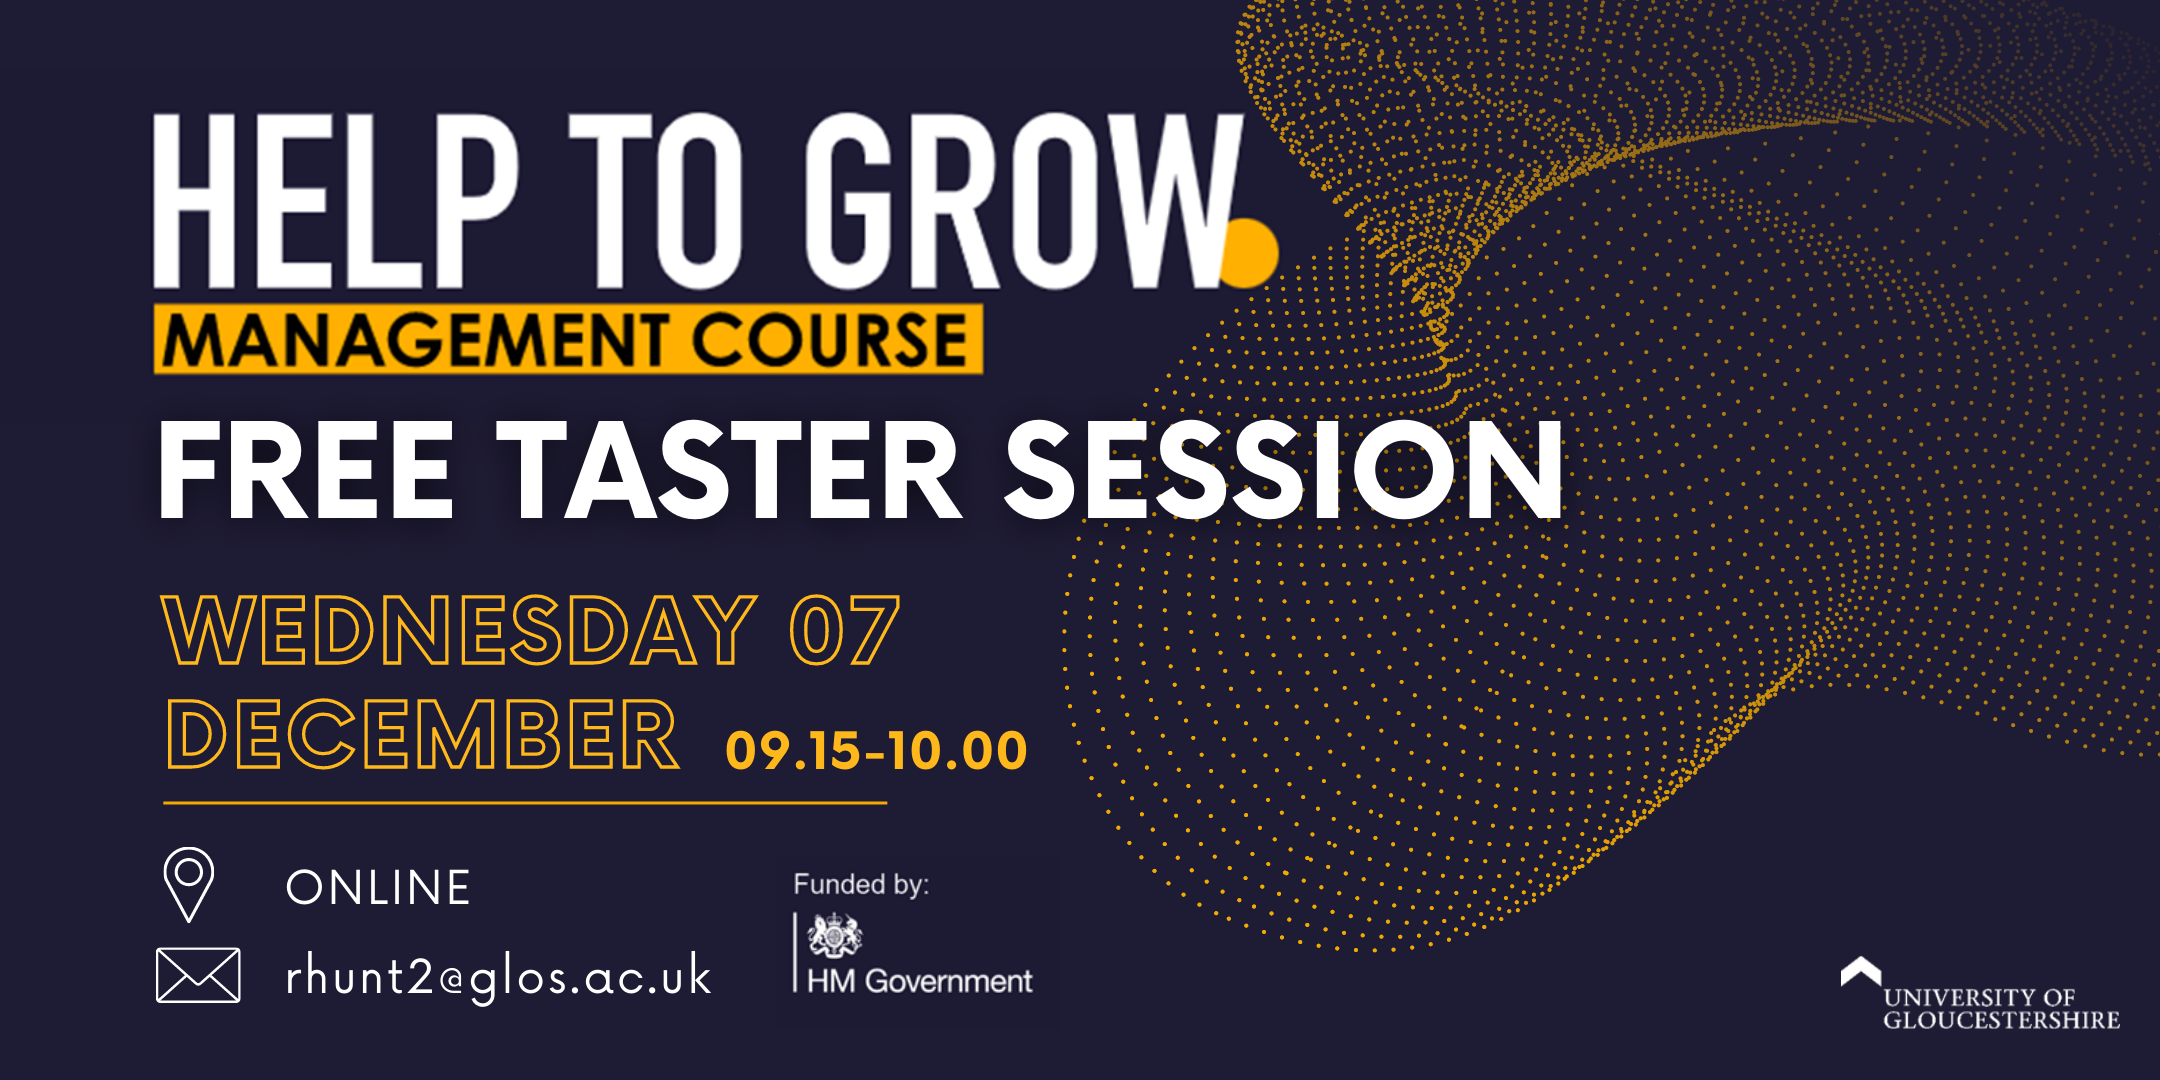 Boost your leadership skills and 2023 business performance with FREE leadership session